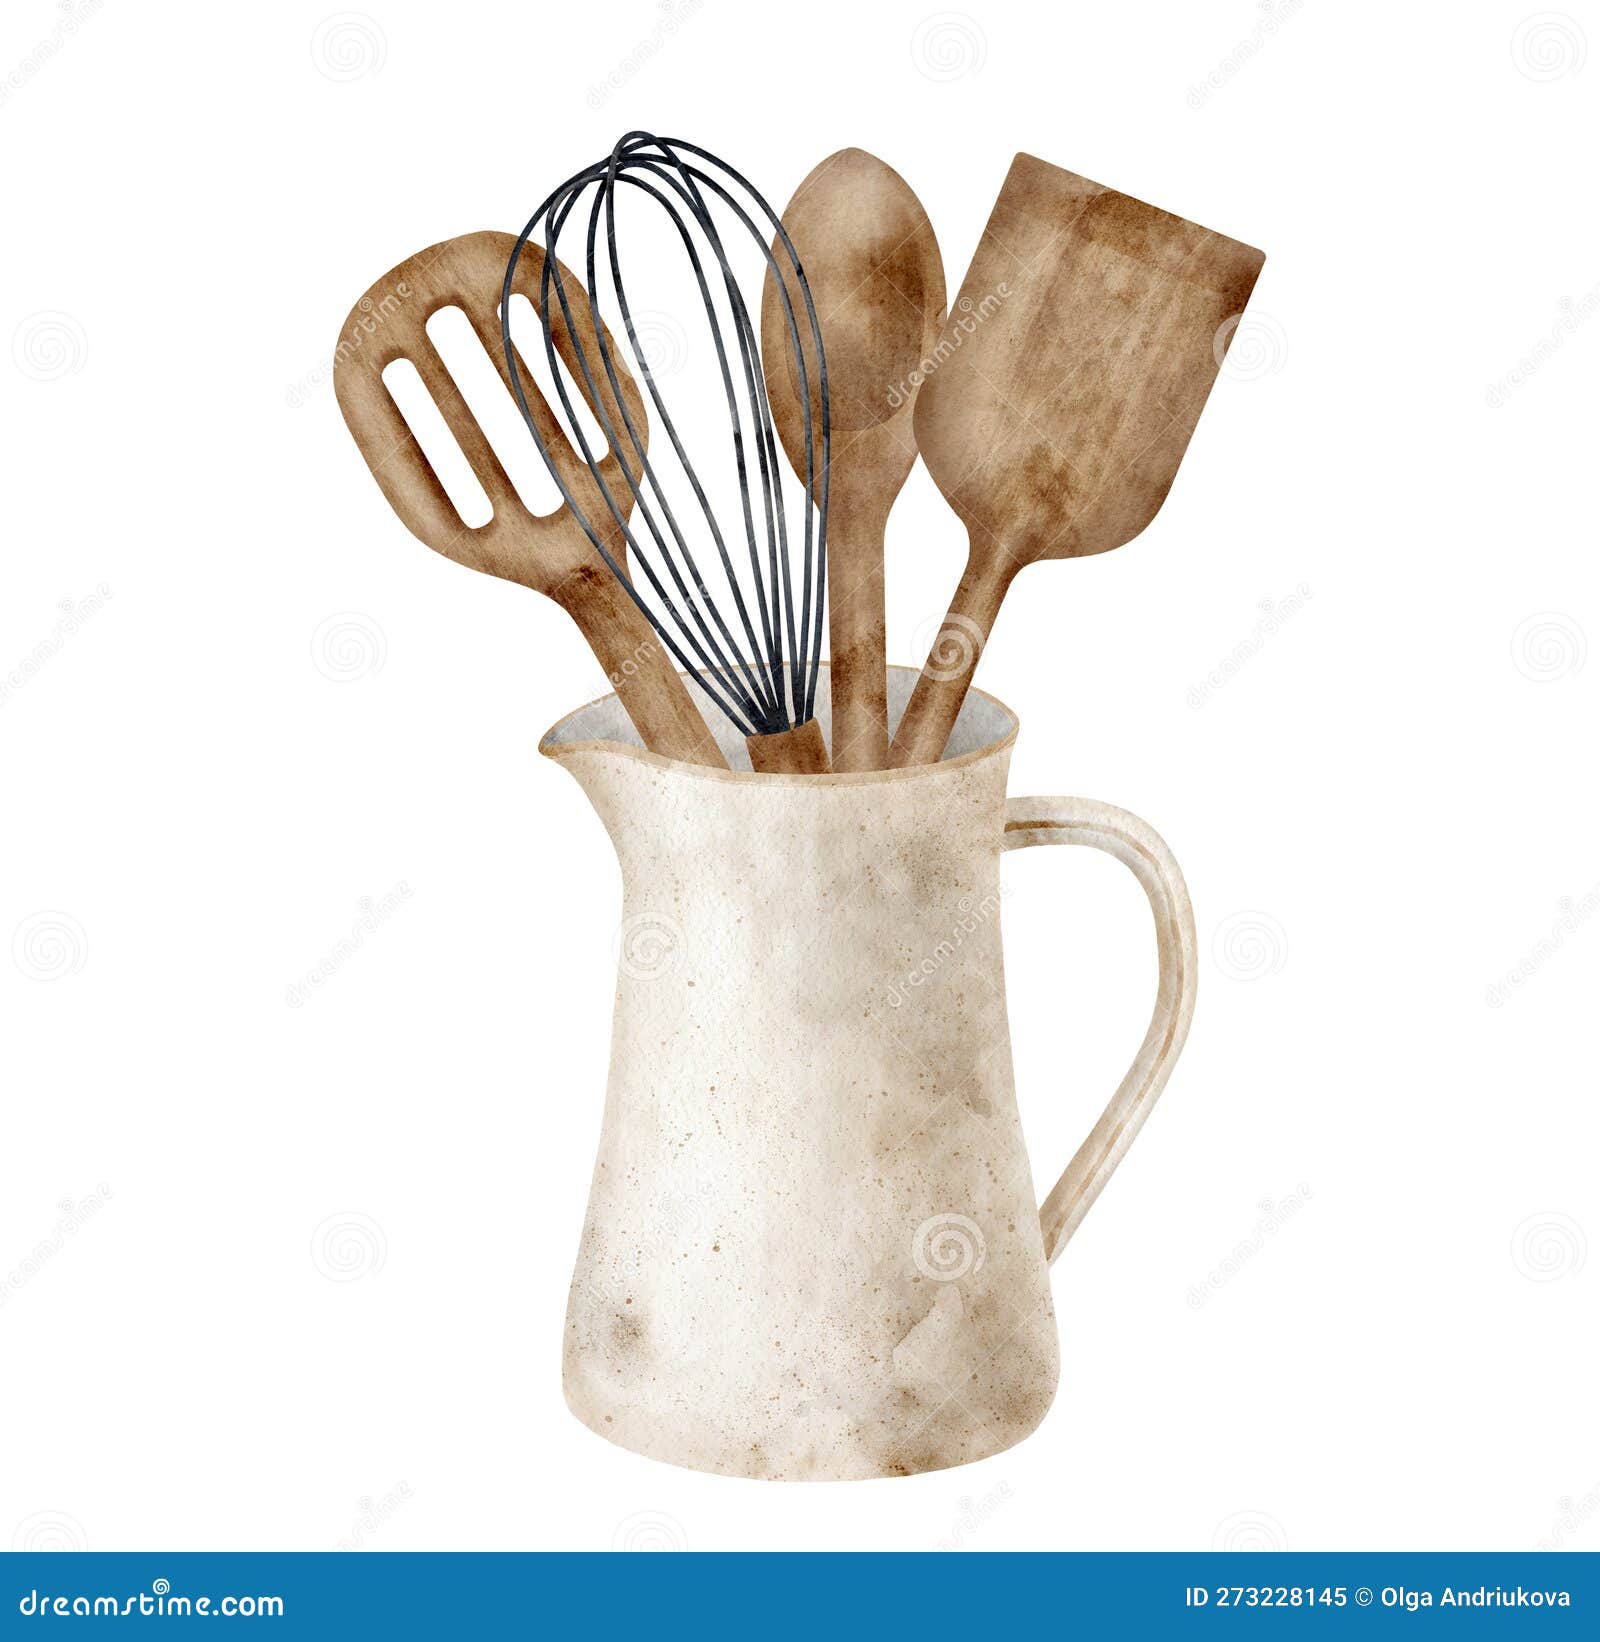 https://thumbs.dreamstime.com/z/watercolor-baking-utensils-illustration-hand-drawn-wood-spatula-pastry-brush-mixing-spoon-whisk-ceramic-jug-isolated-273228145.jpg